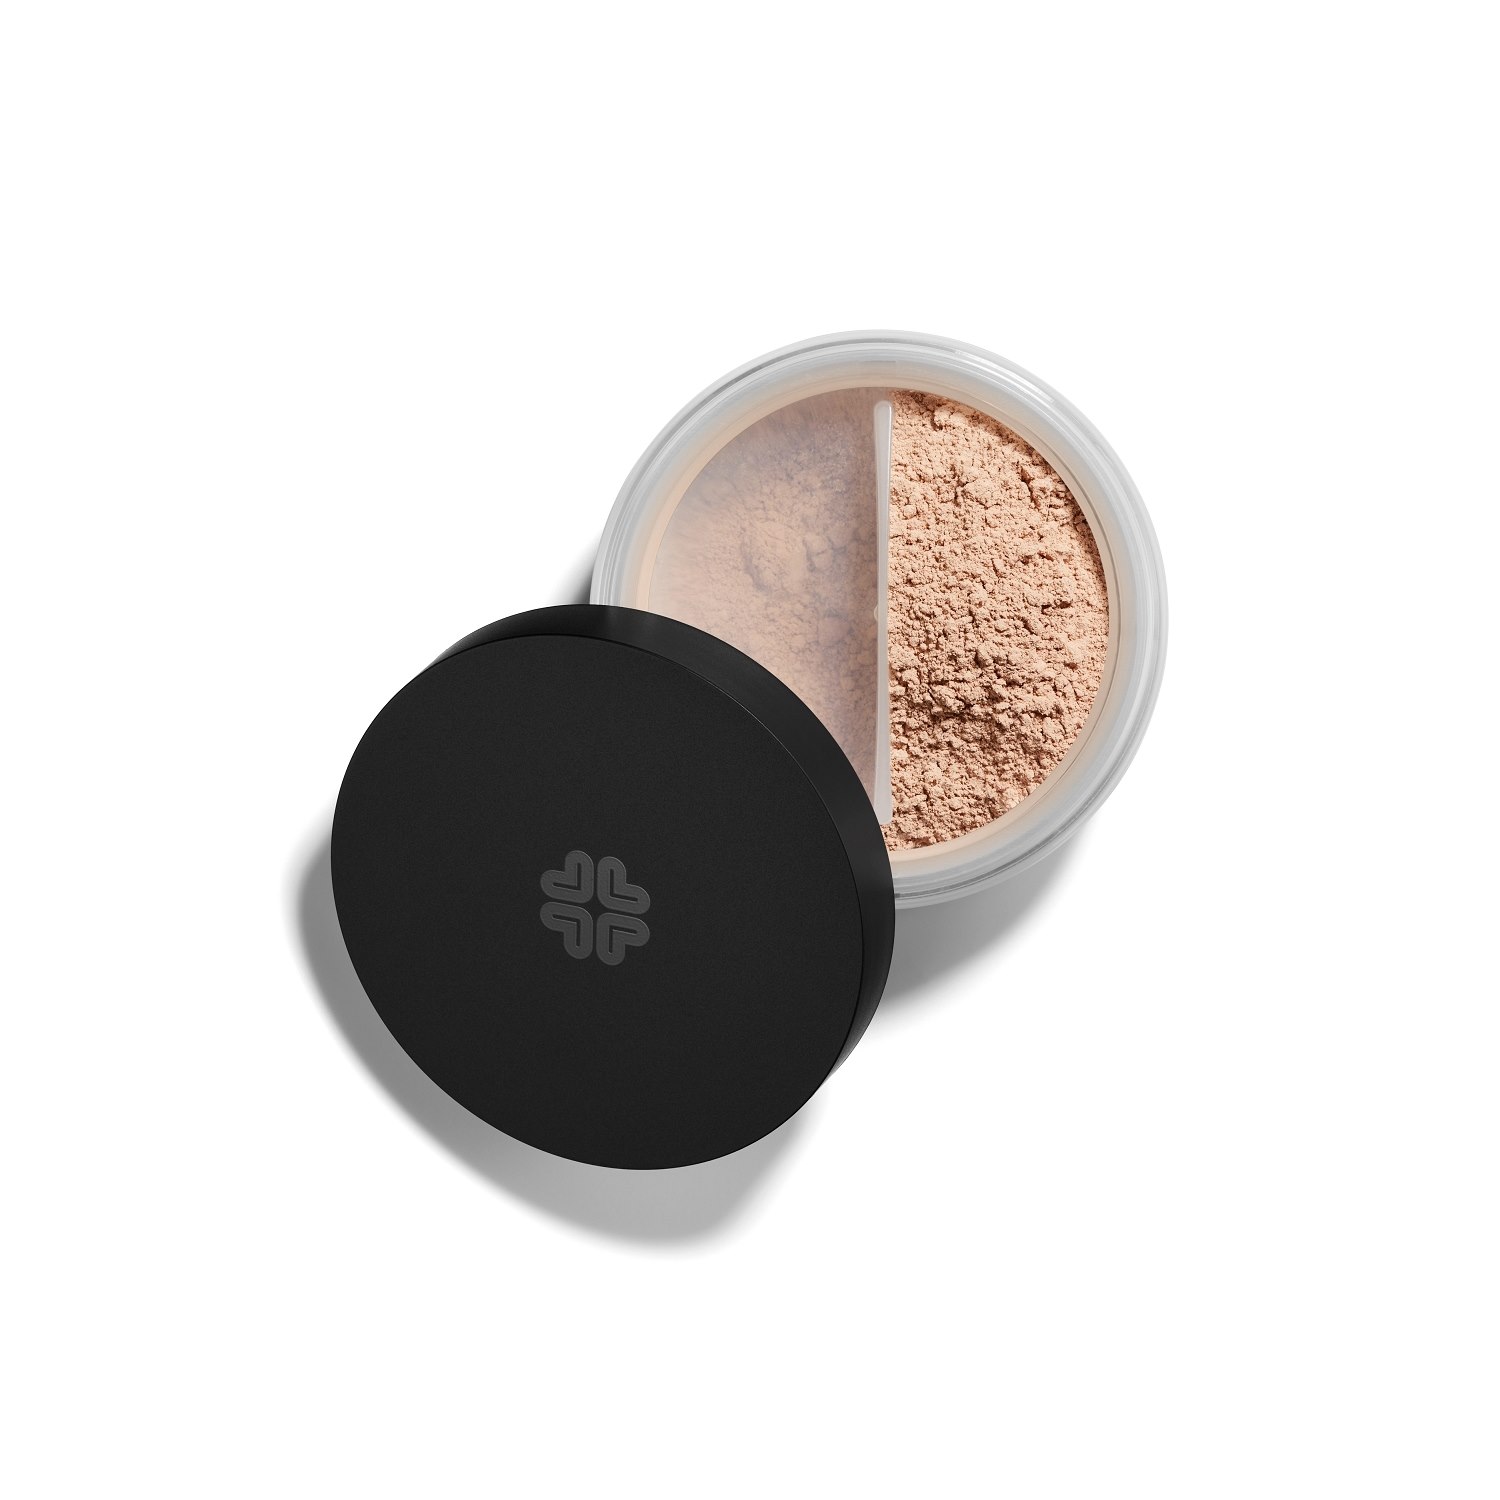 Lily Lolo Mineral Foundation SPF 15, 10 g Candy Cane